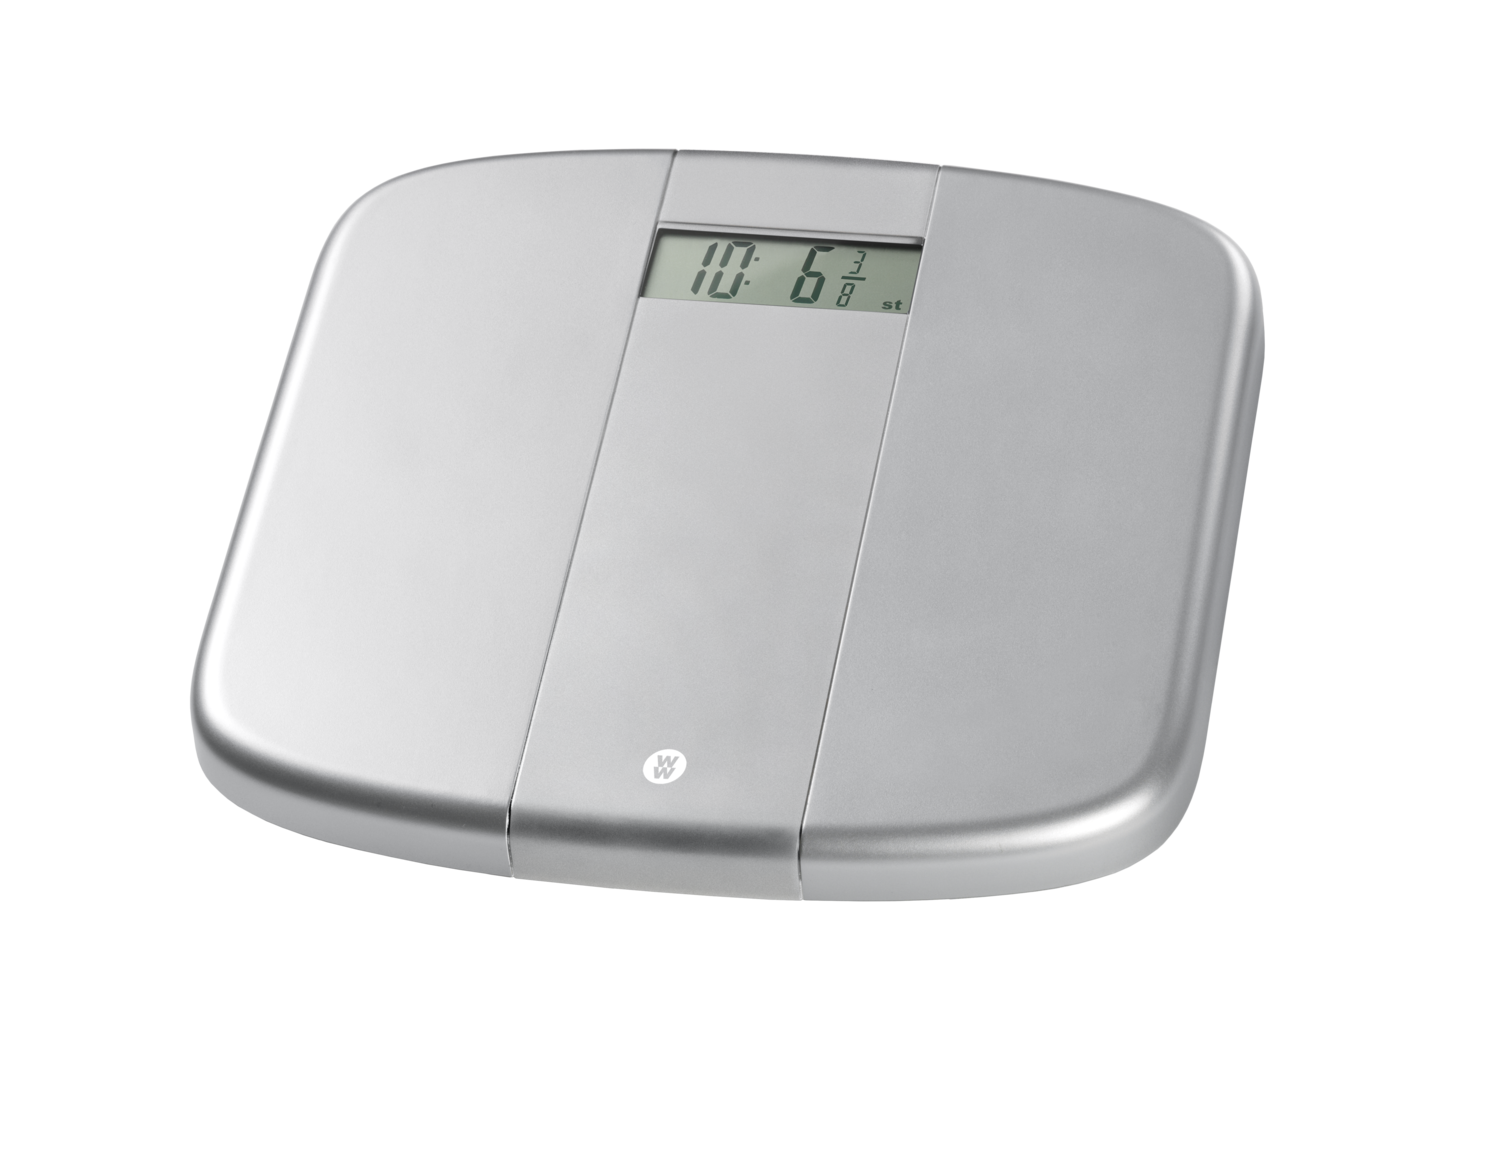 Buy WeightWatchers Extra Wide Easy Read Body Analyser Scale